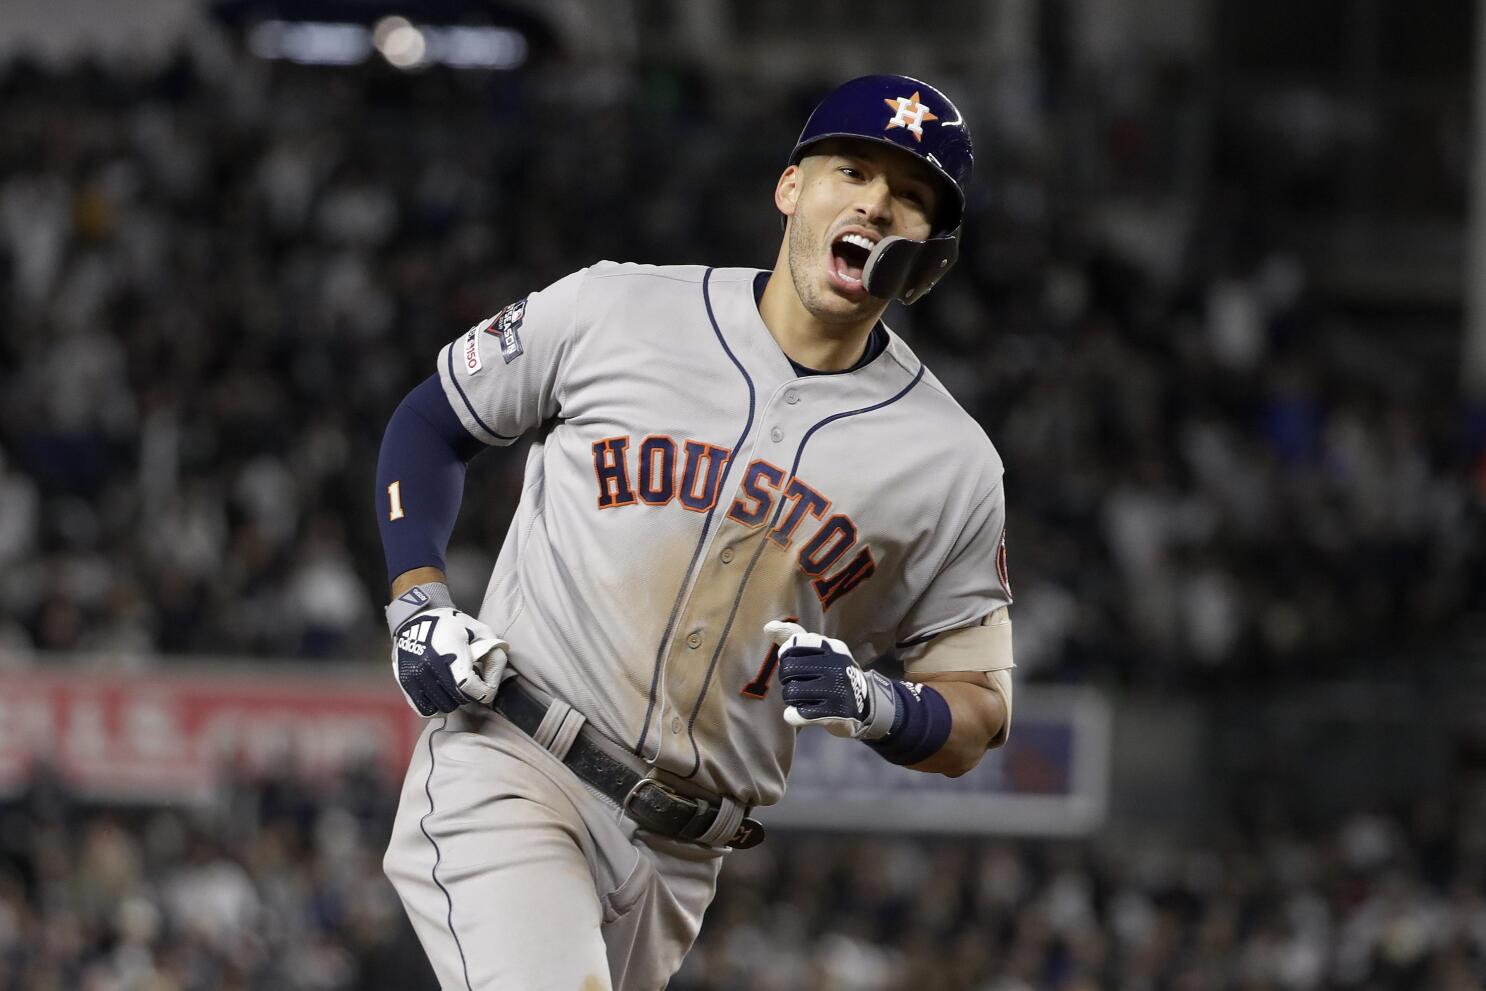 Cubs' Bryant, Astros' Correa voted top rookies